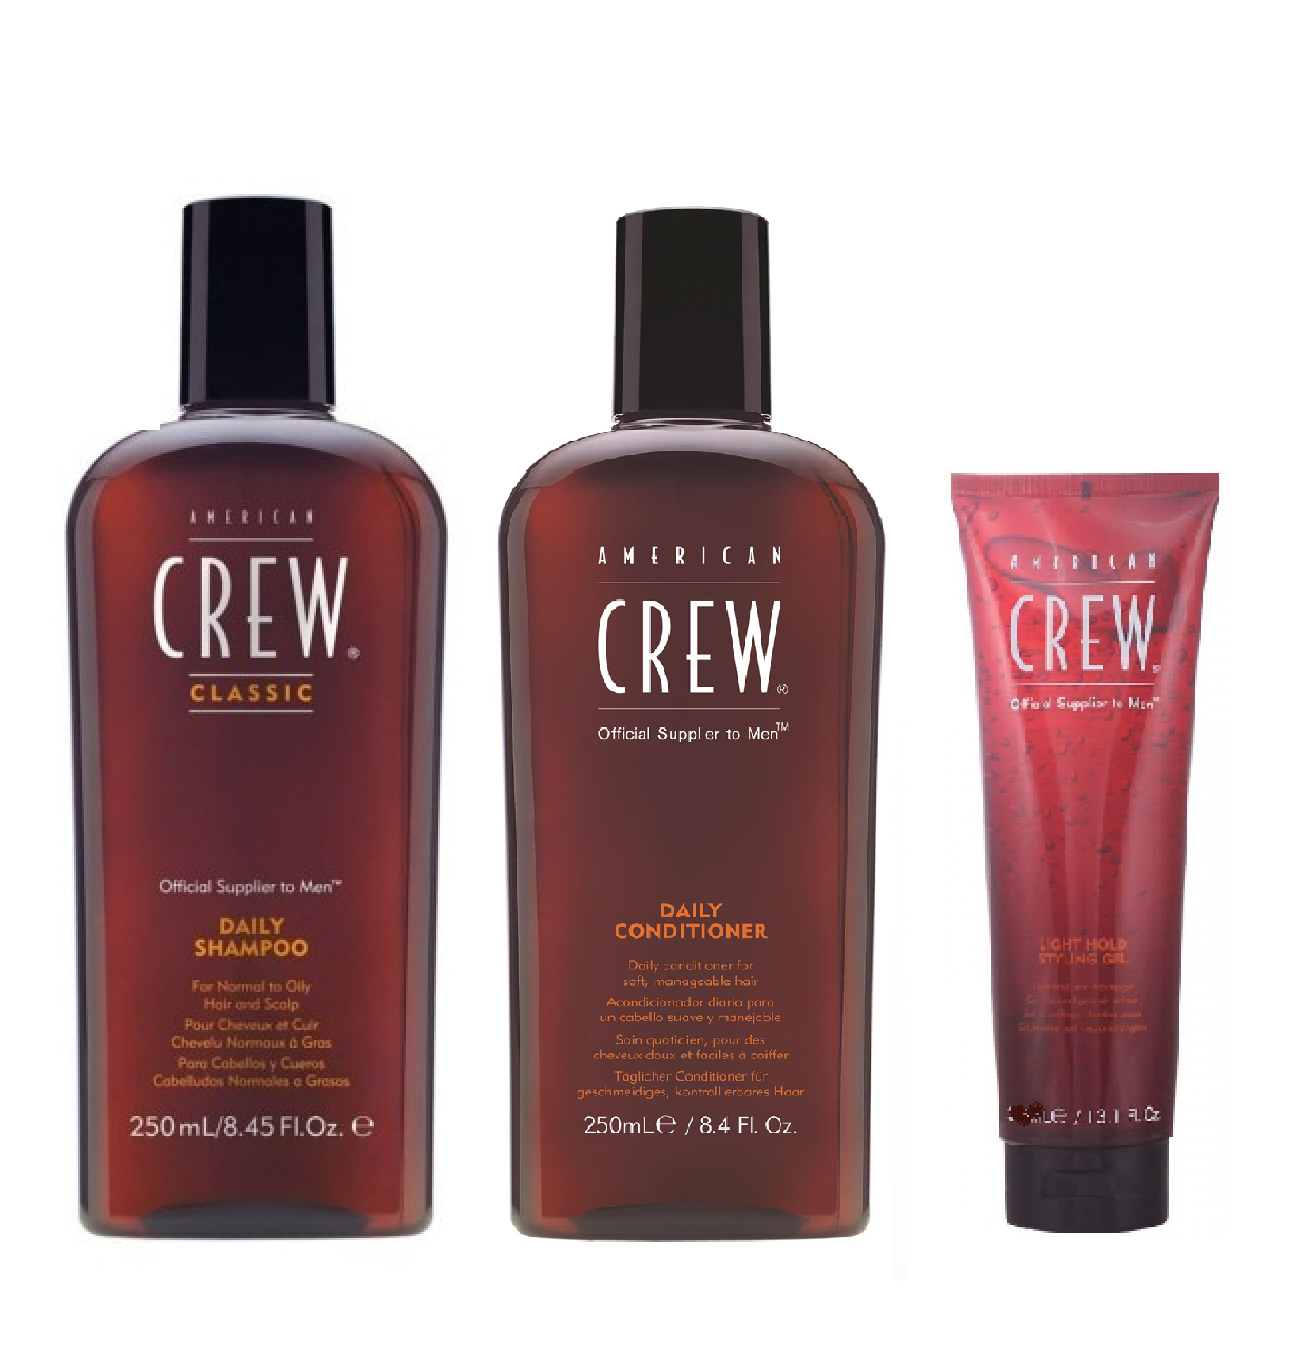 American Crew Daily Shampoo 250ml, Conditioner 250ml and Light Hold Gel 390ml